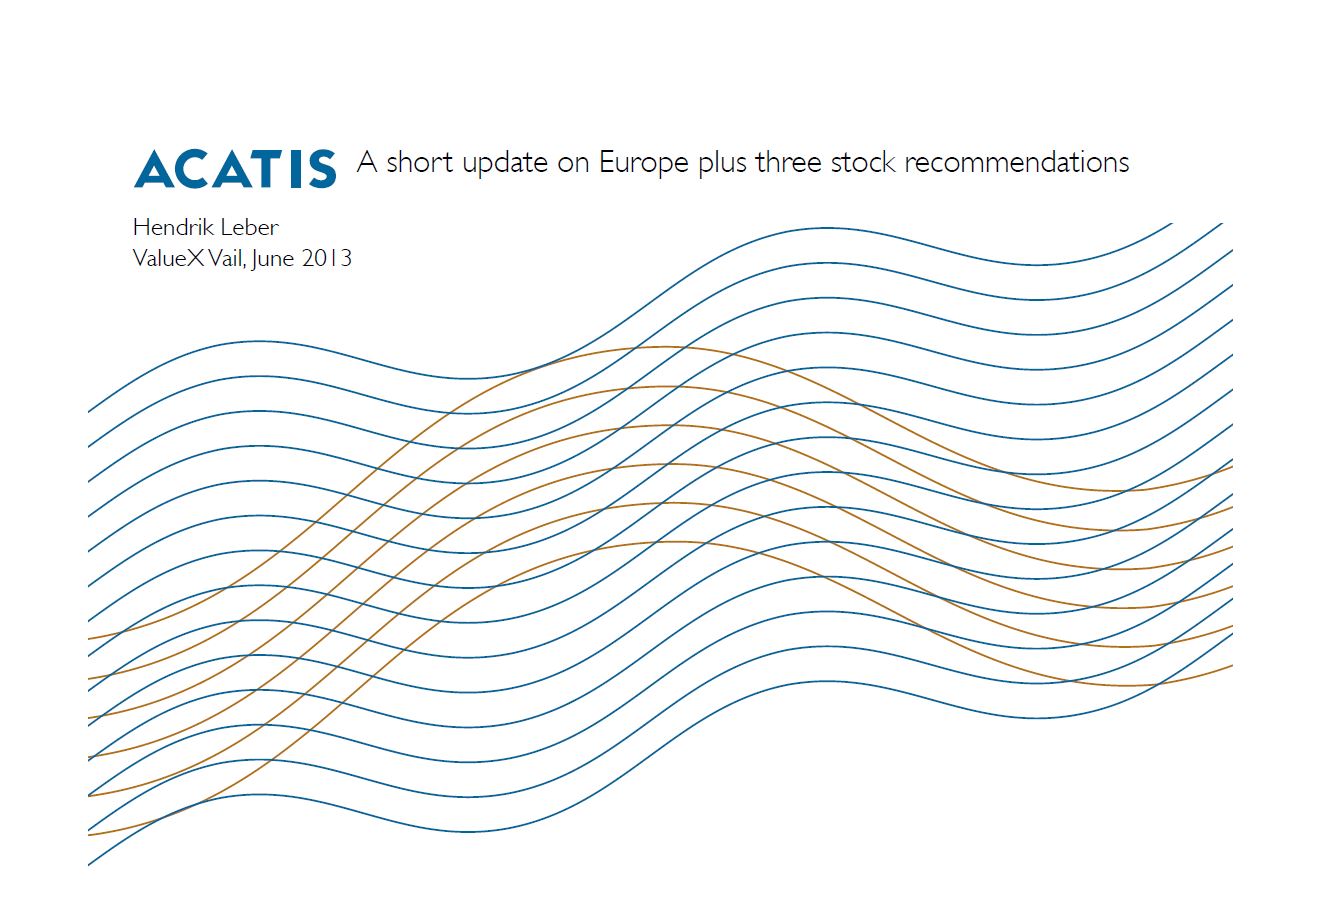 ValueXVail 2013 - ACATIS – A short update on Europe + 3 stock recommendations by Hendrik Leber